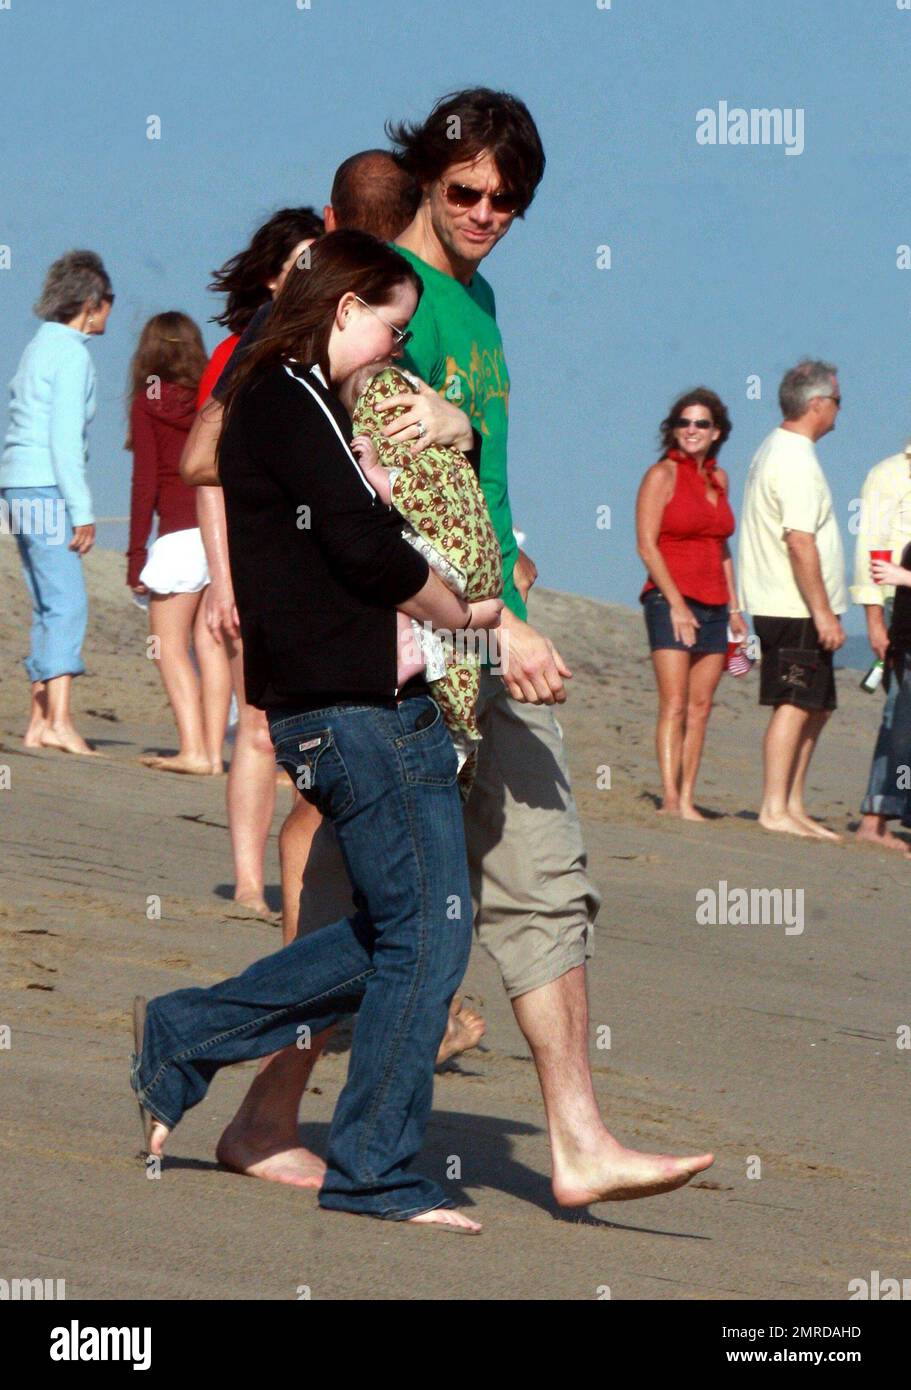 Jim Carrey celebrates the Fourth of July by hosting a beach party at his home. Carrey's daughter Jane brought his new grandson Riley Santana, who Jim showed off to guests that included Lisa Kudrow among other celebs. Malibu, CA. 7/4/10.   . Stock Photo